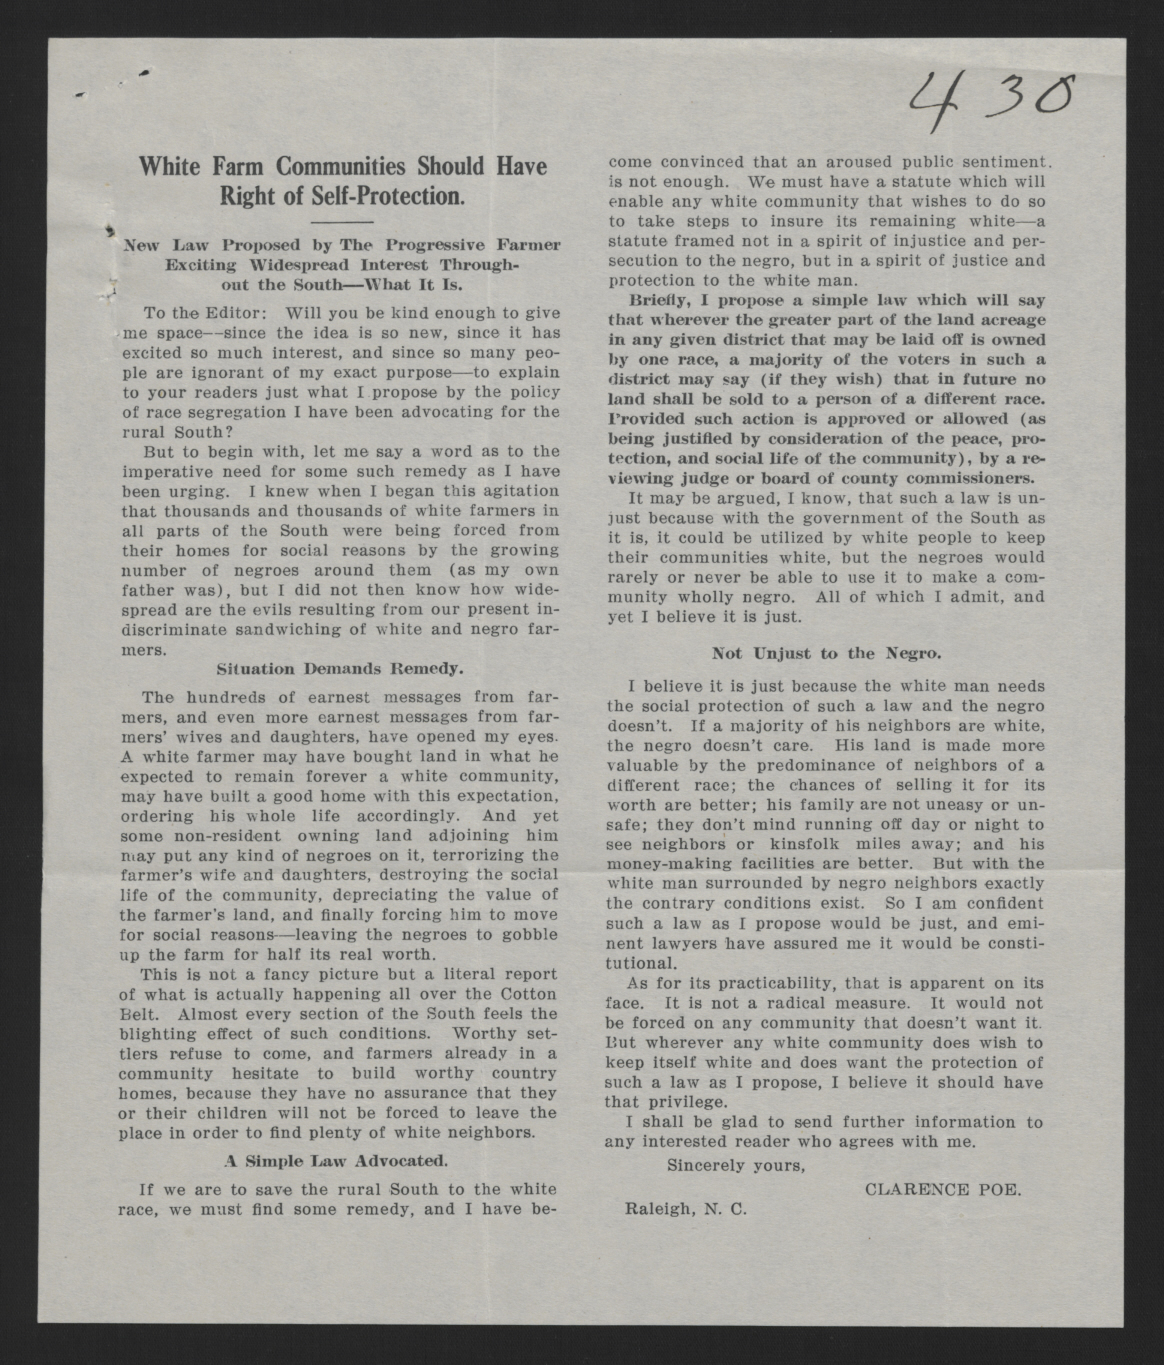 "White Farm Communities Should Have Right of Self-Protection," by Clarence Poe, circa September 1913